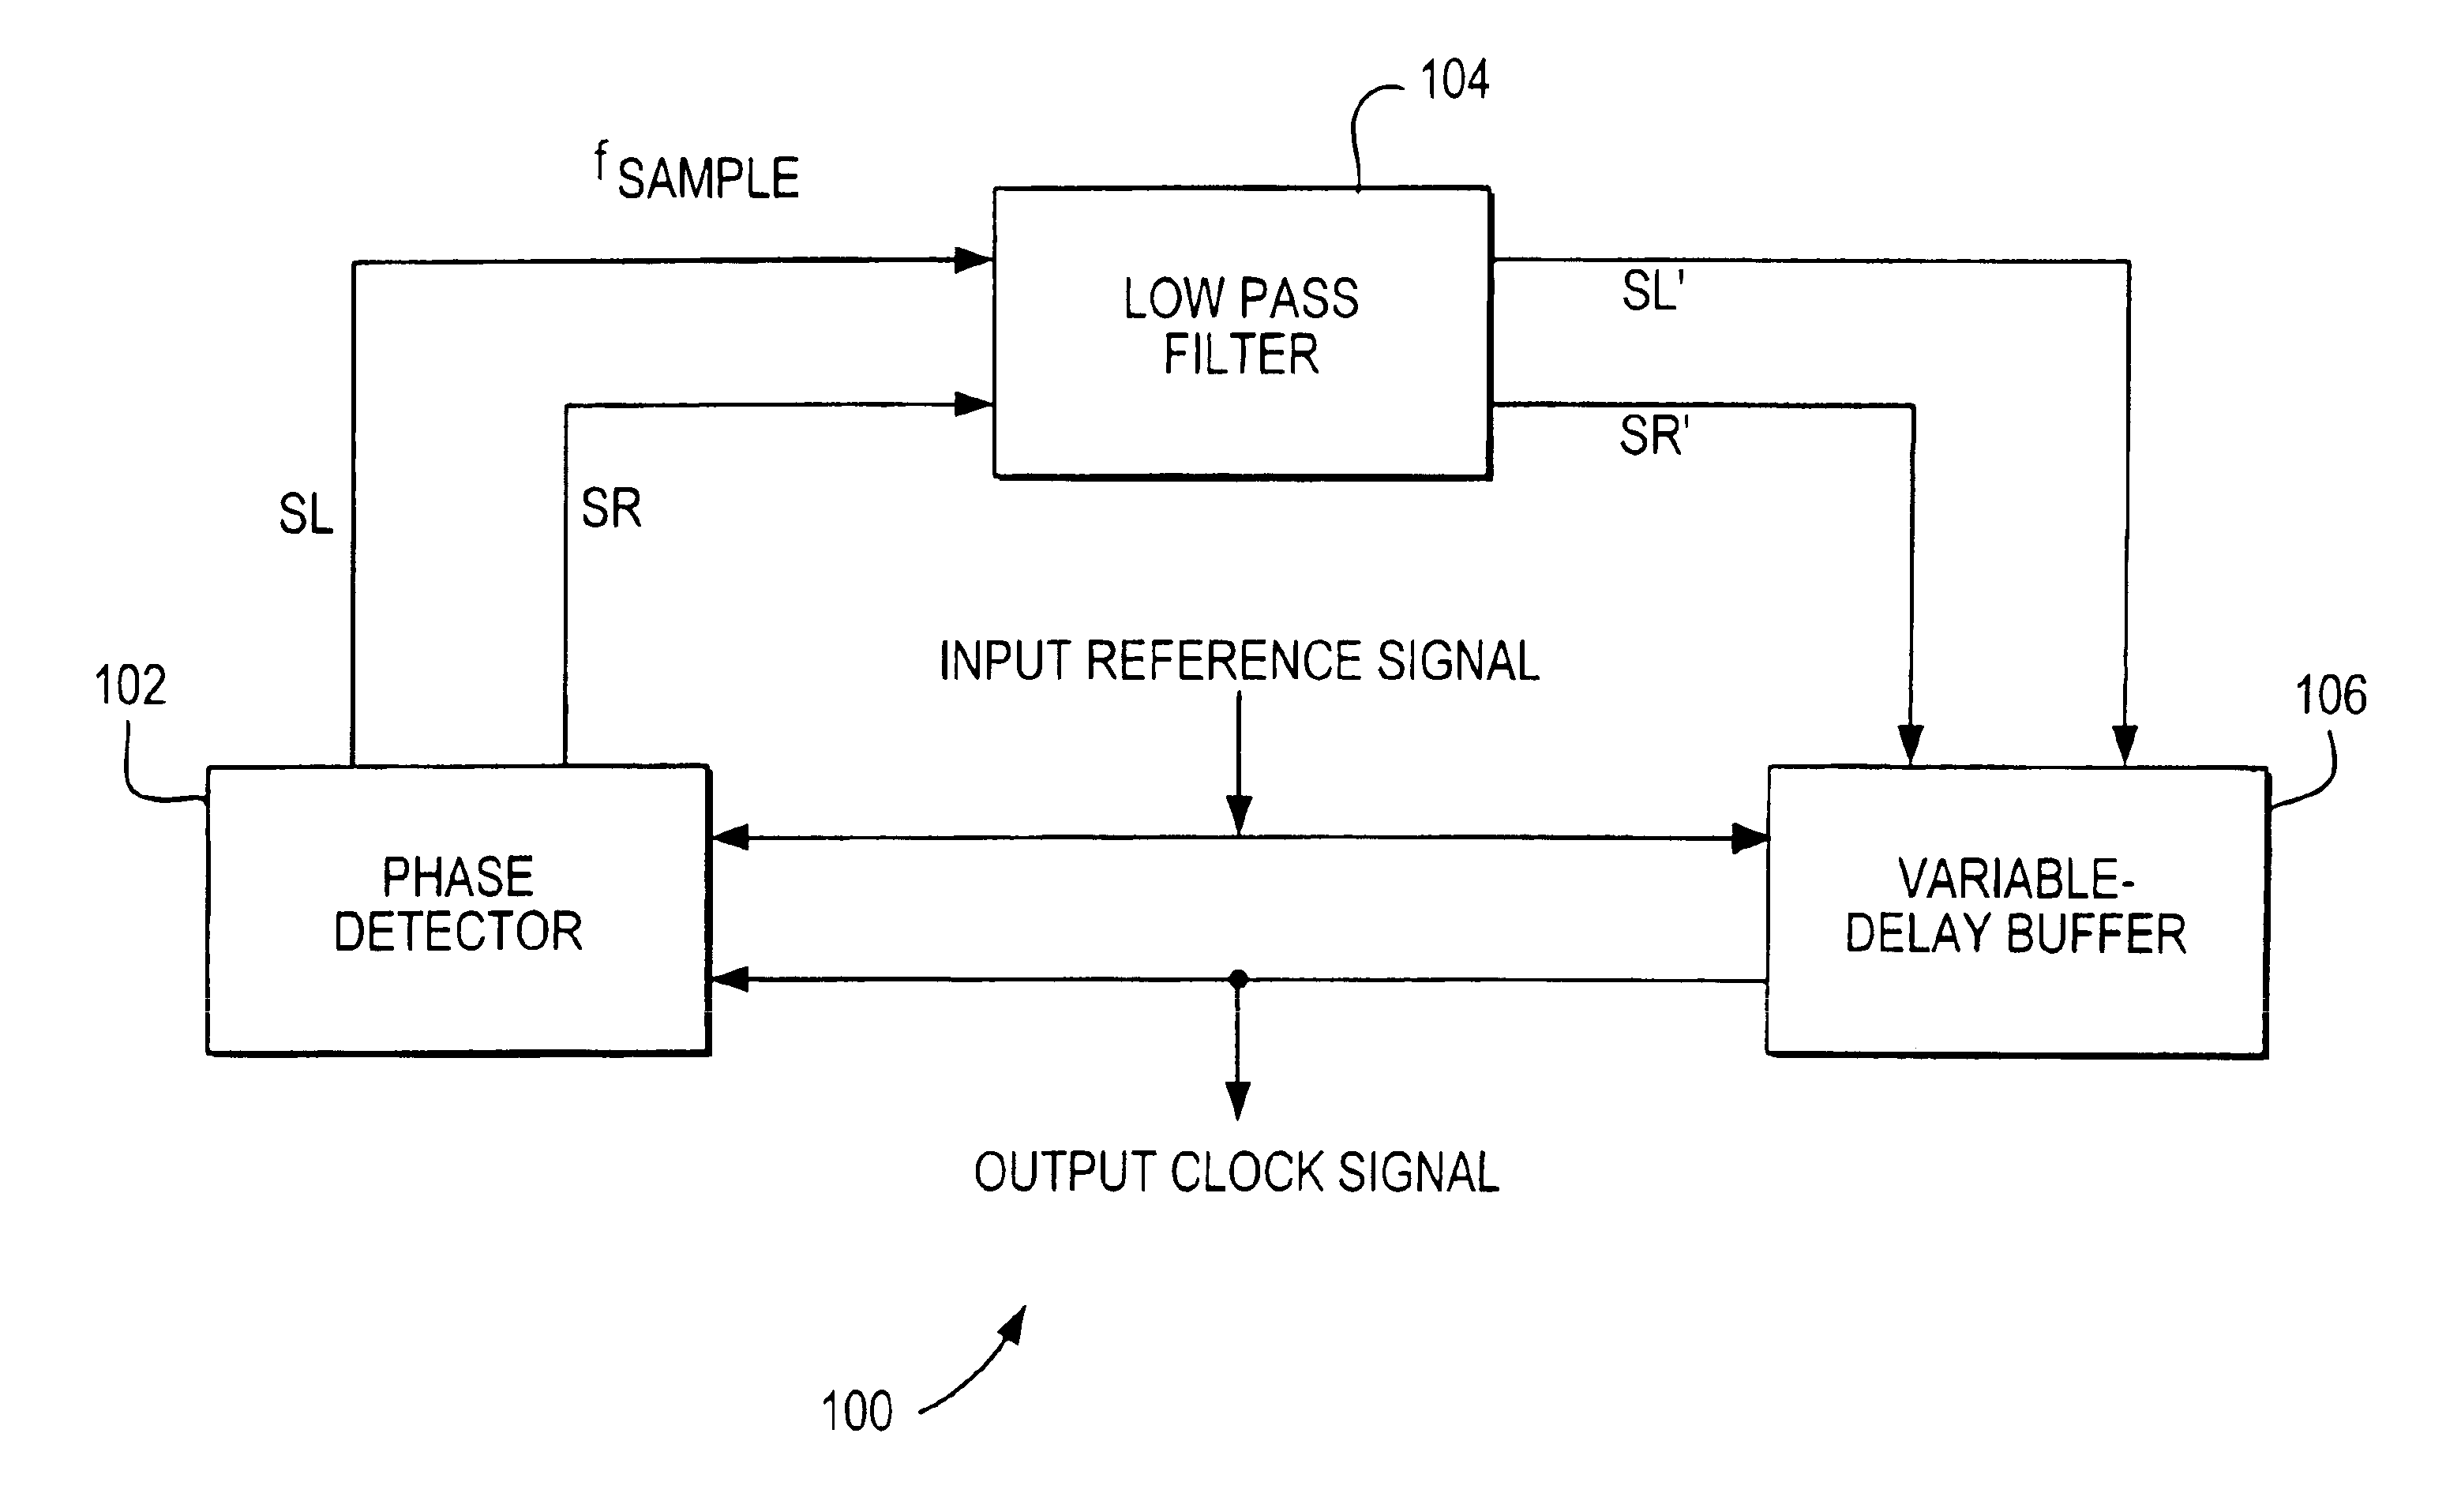 Low pass filters in DLL circuits